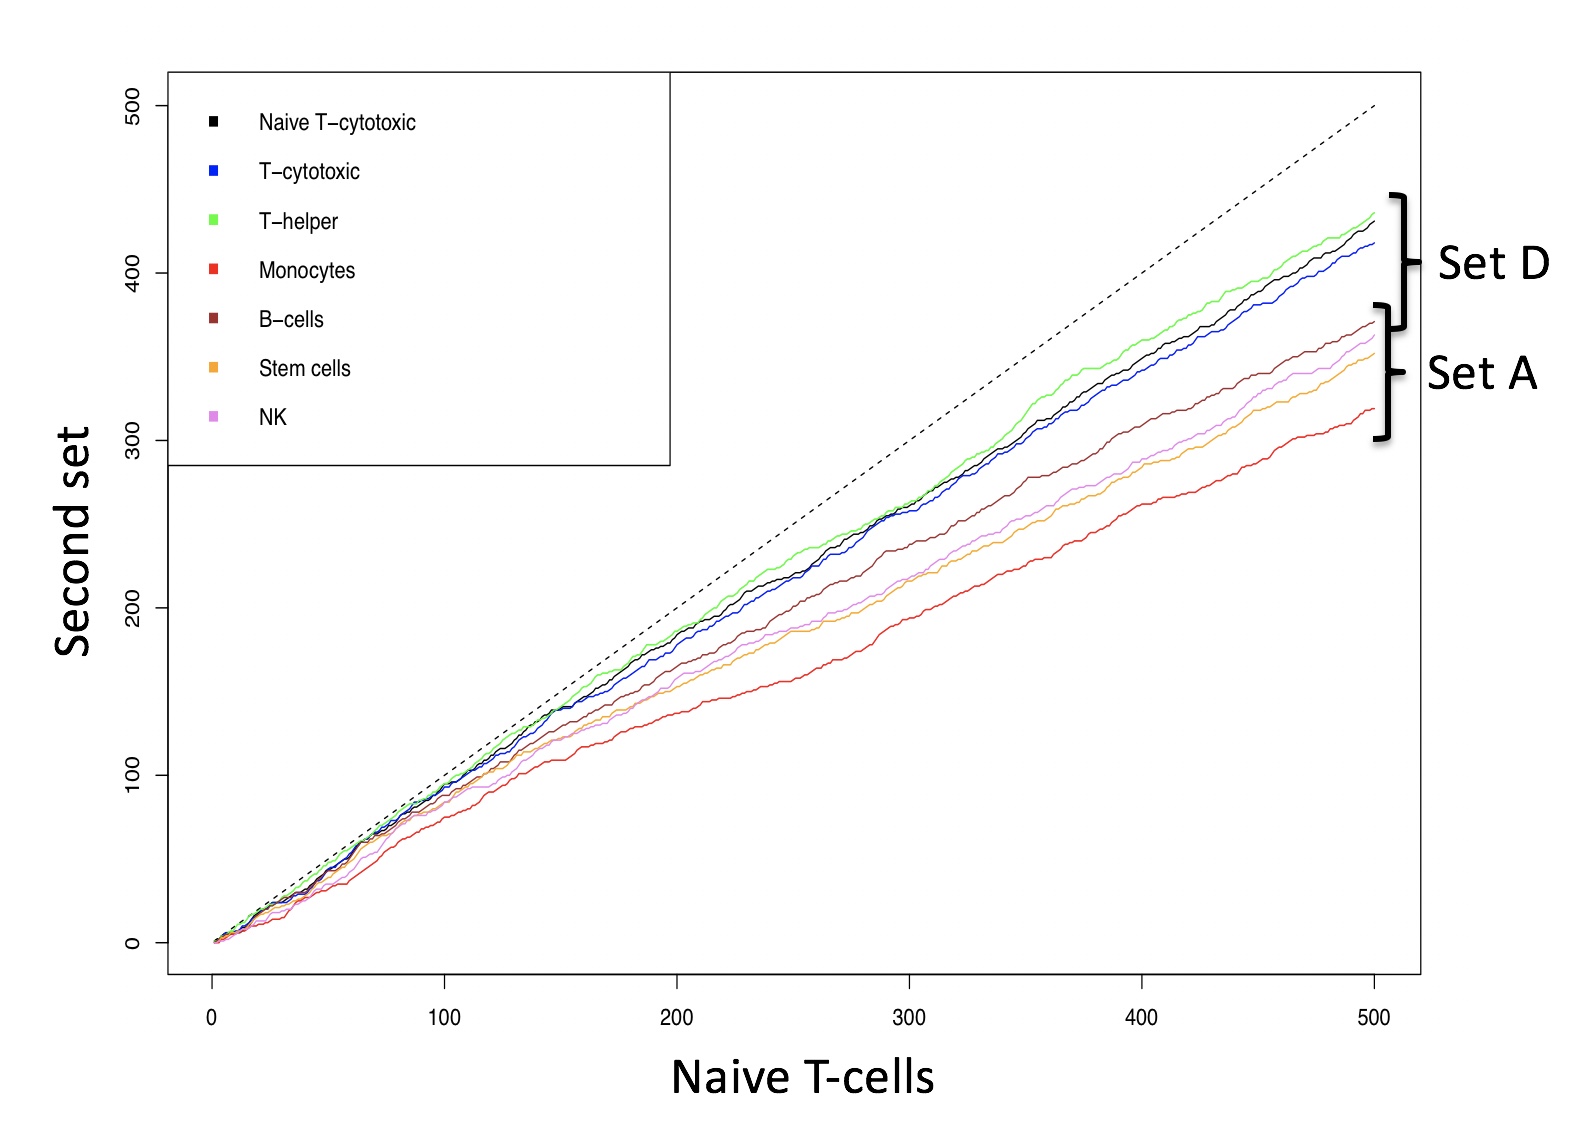 Identity between naive T-cells and the other cell types in set A and D in gene lists of increasing length. Identity between two data sets is shown by the dashed line.